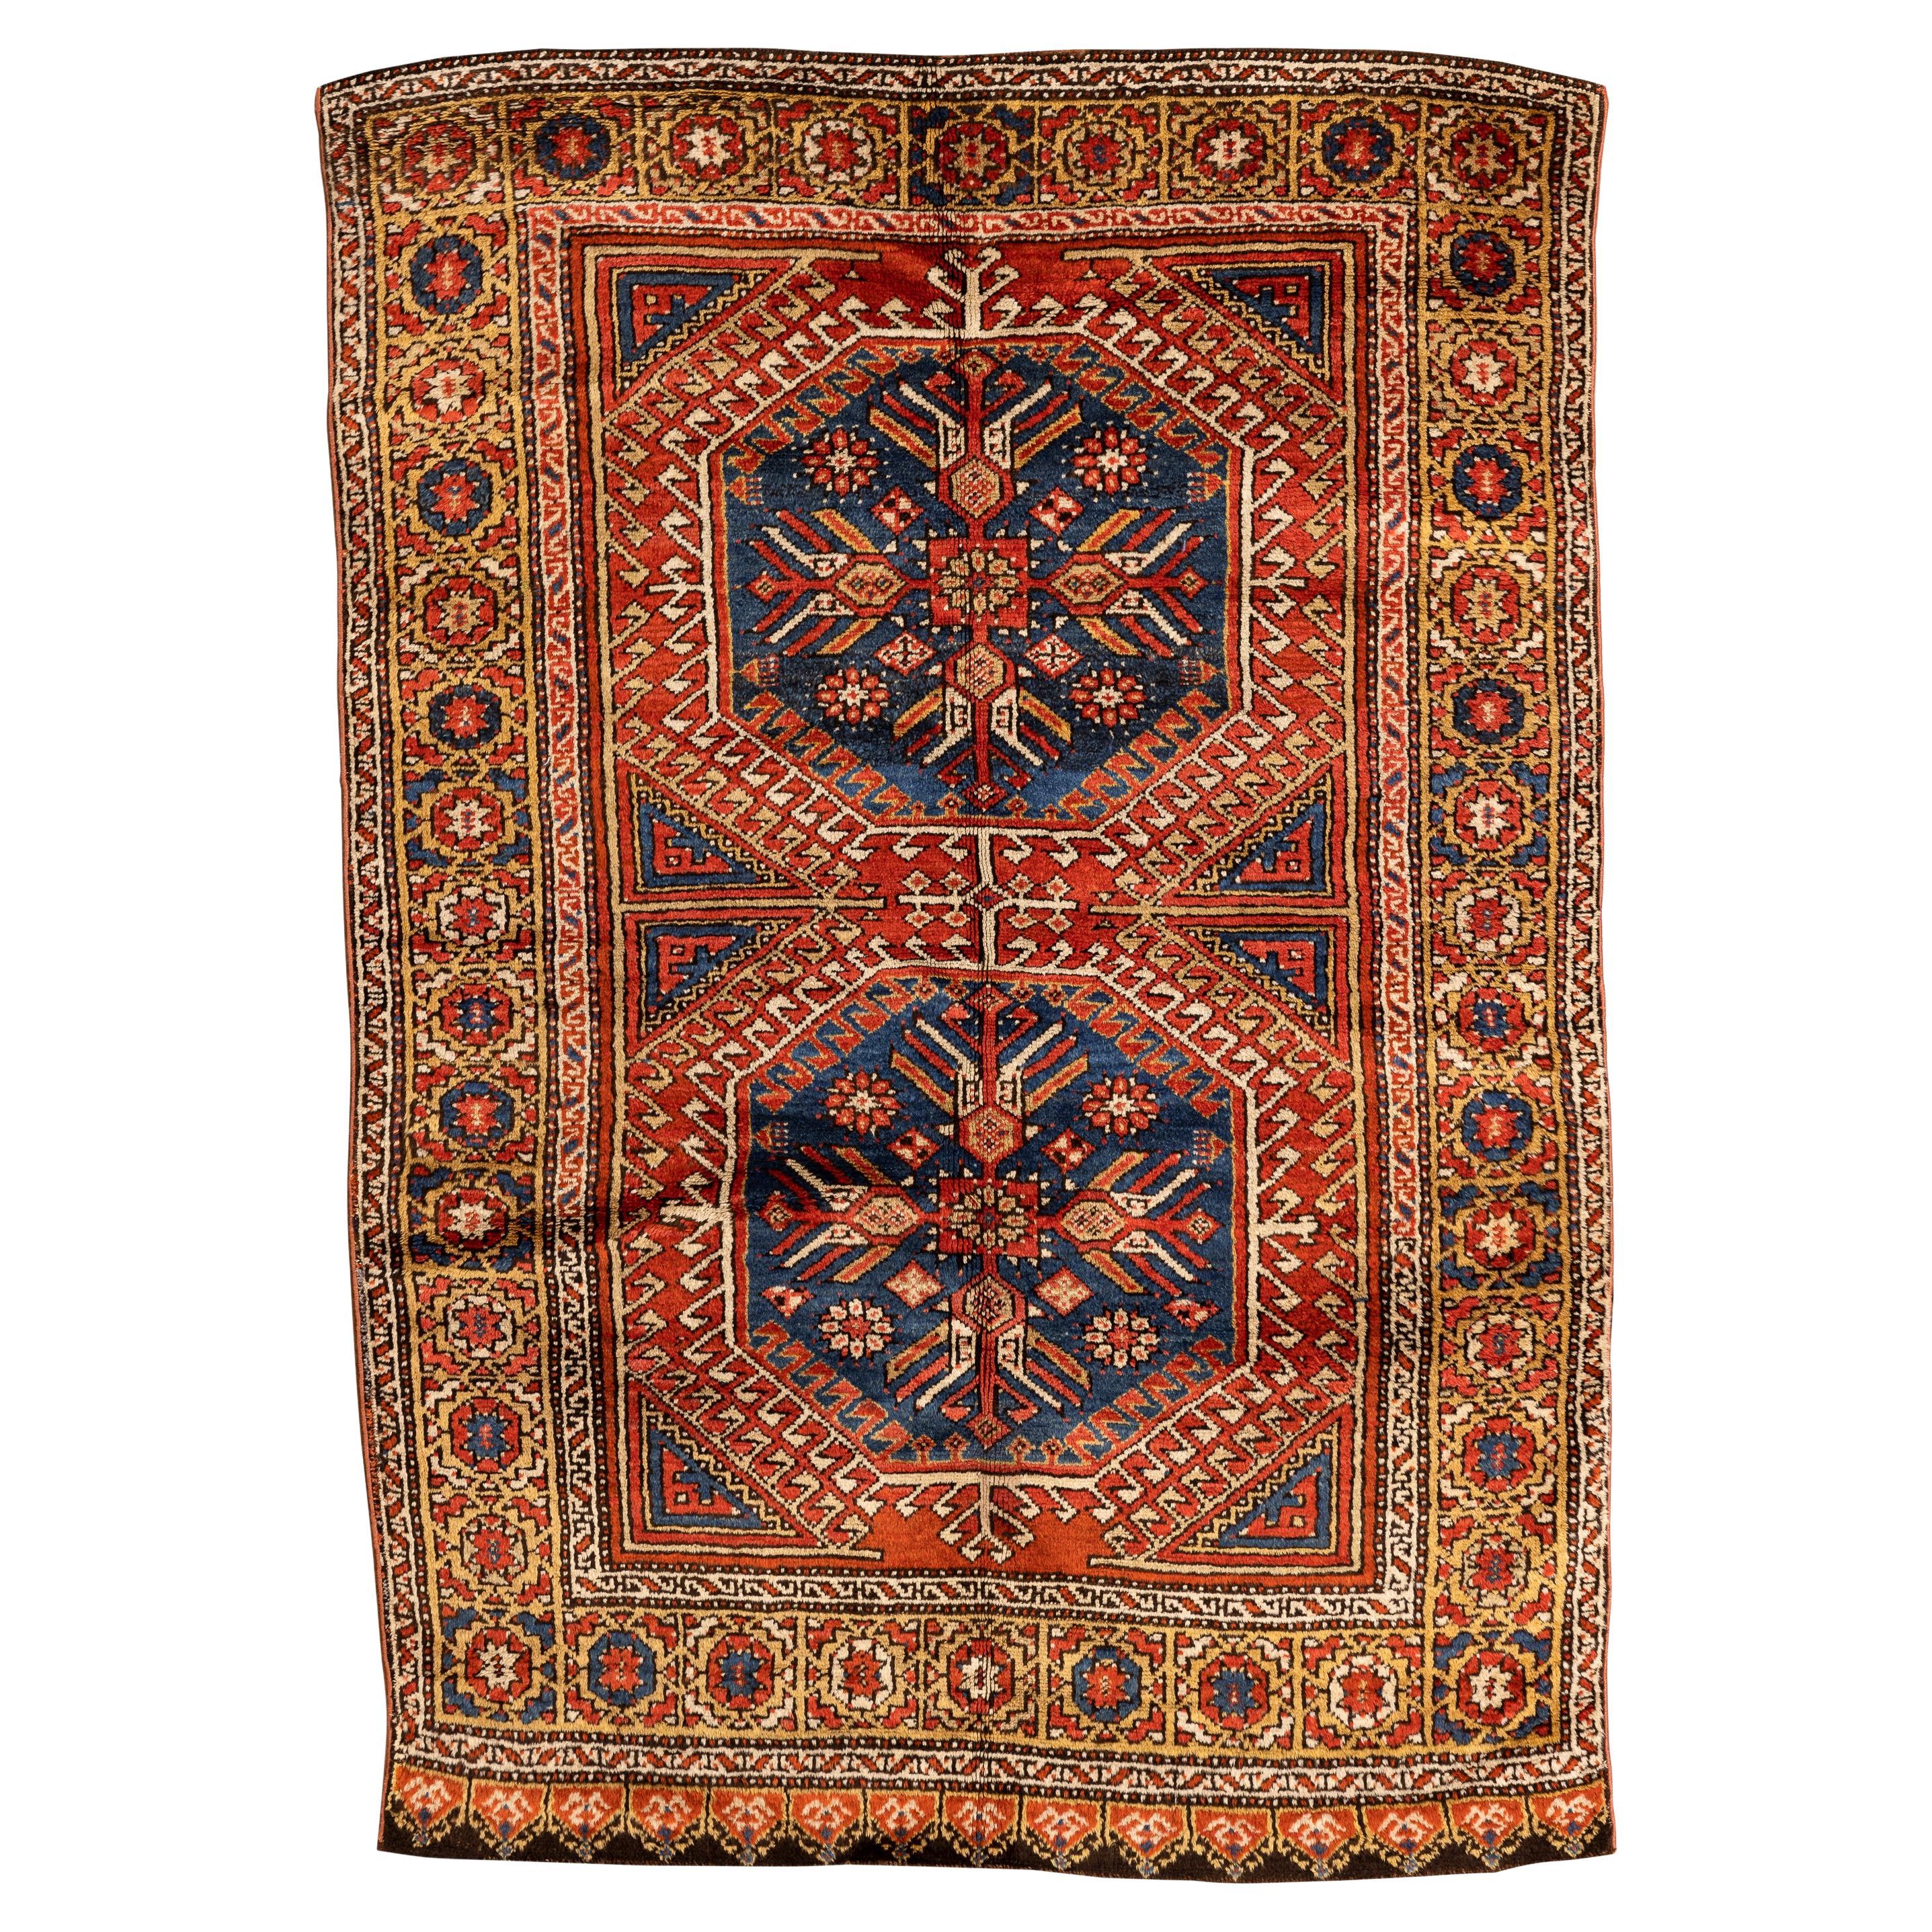 Konya – Central Anatolia

This Konya rug is one of the most famous and desired Turkish rugs for its magnificent colours, bright wool and bold nomadic design. With two geometric medallions, known as memling guls, in the centre, this rug has a